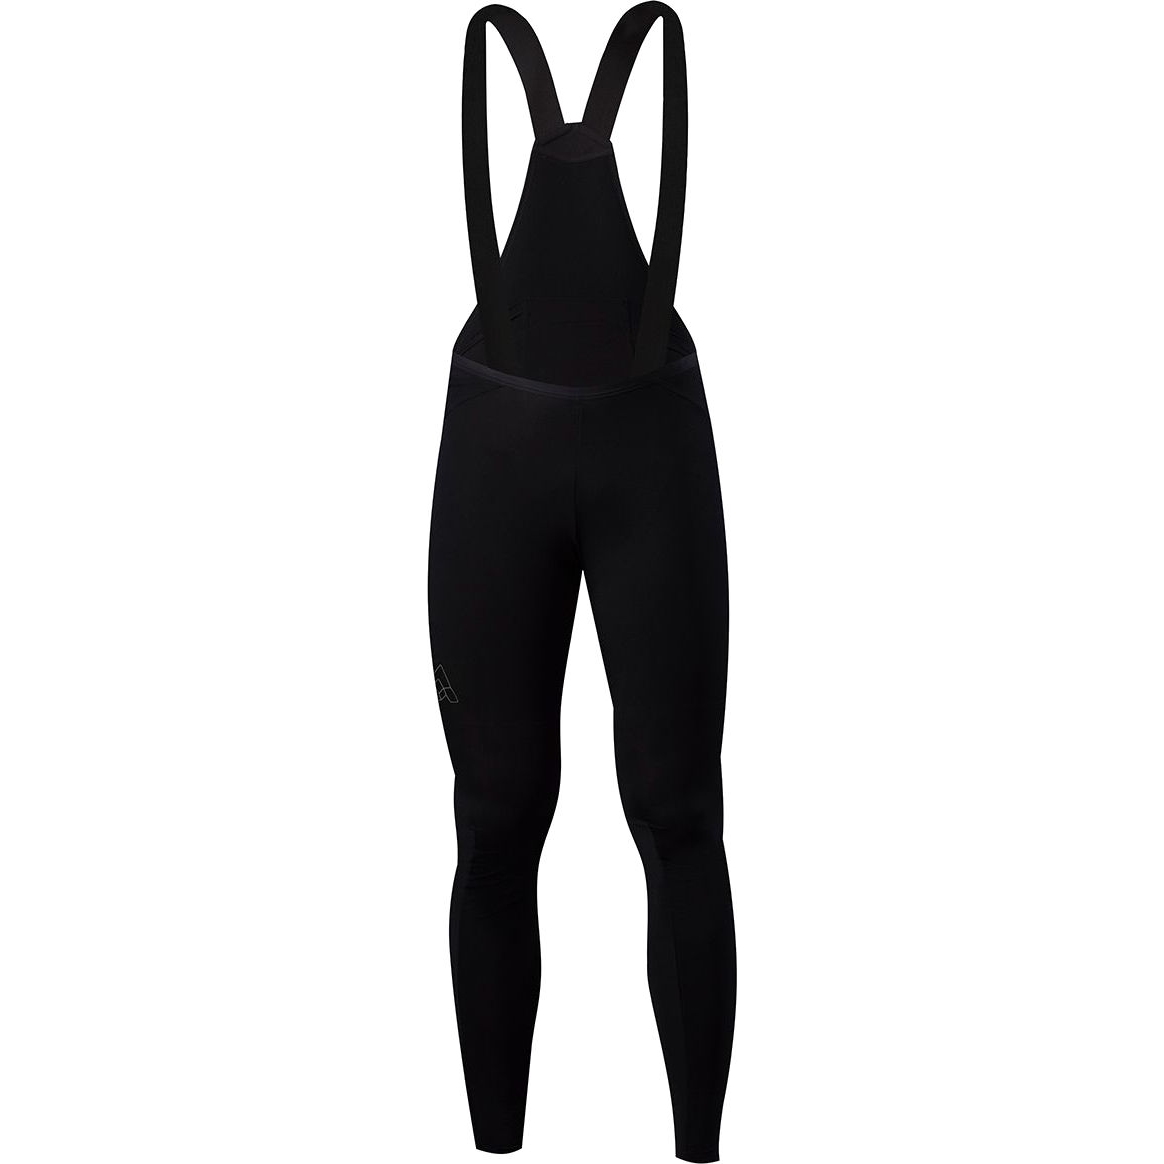 Picture of 7mesh TK1 Trimmable Bib Tights - Black